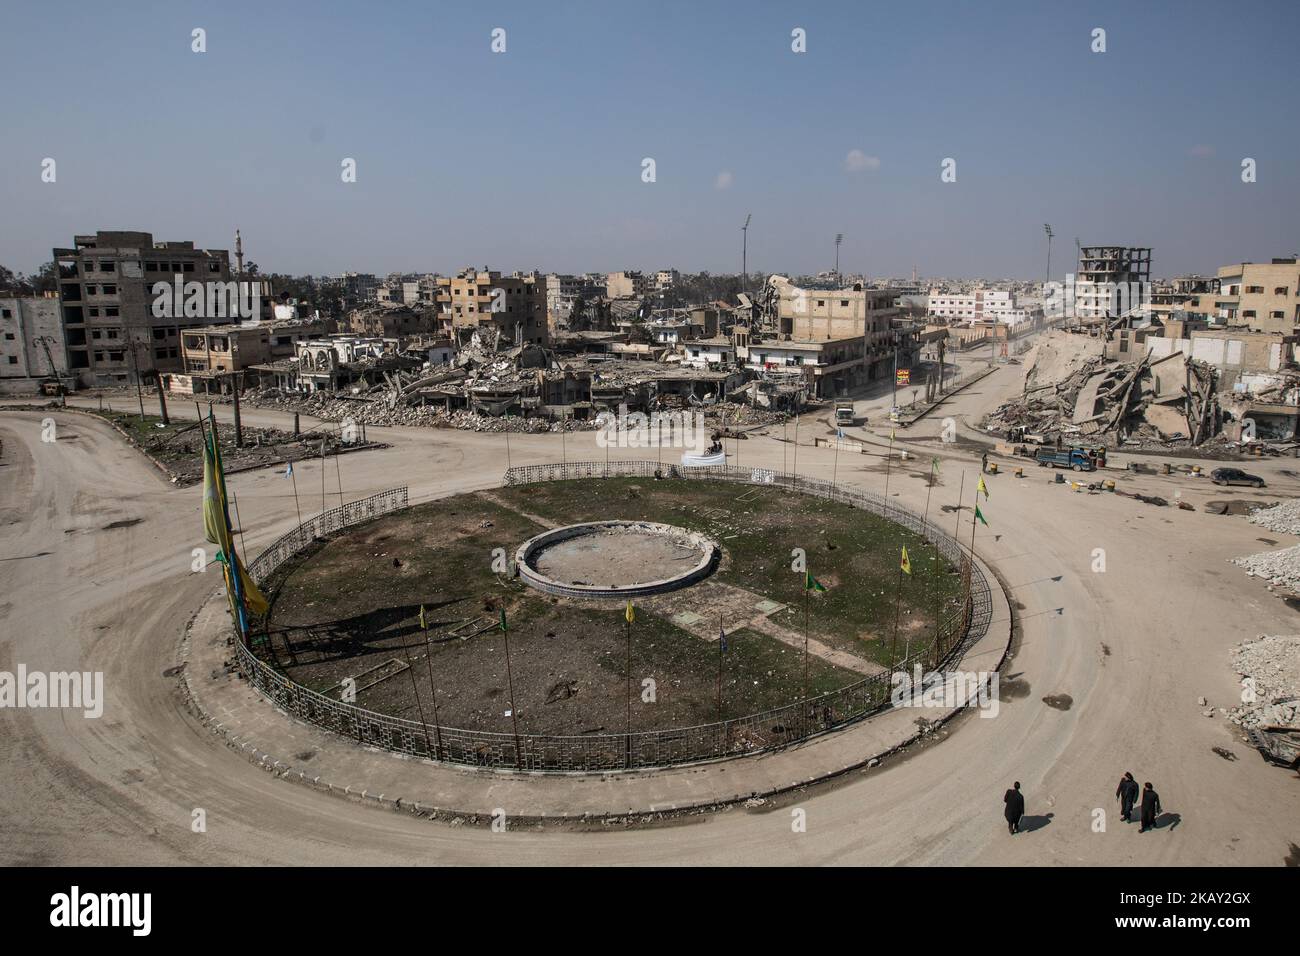 The Naim roundabout in Raqqa / Syria was abused as a place for the capital and public executions by the so-called 'Islamic State'. In the background you can see the ruins that characterize Raqqa's cityscape today after the liberation. (Photo by Sebastian Backhaus/NurPhoto) Stock Photo